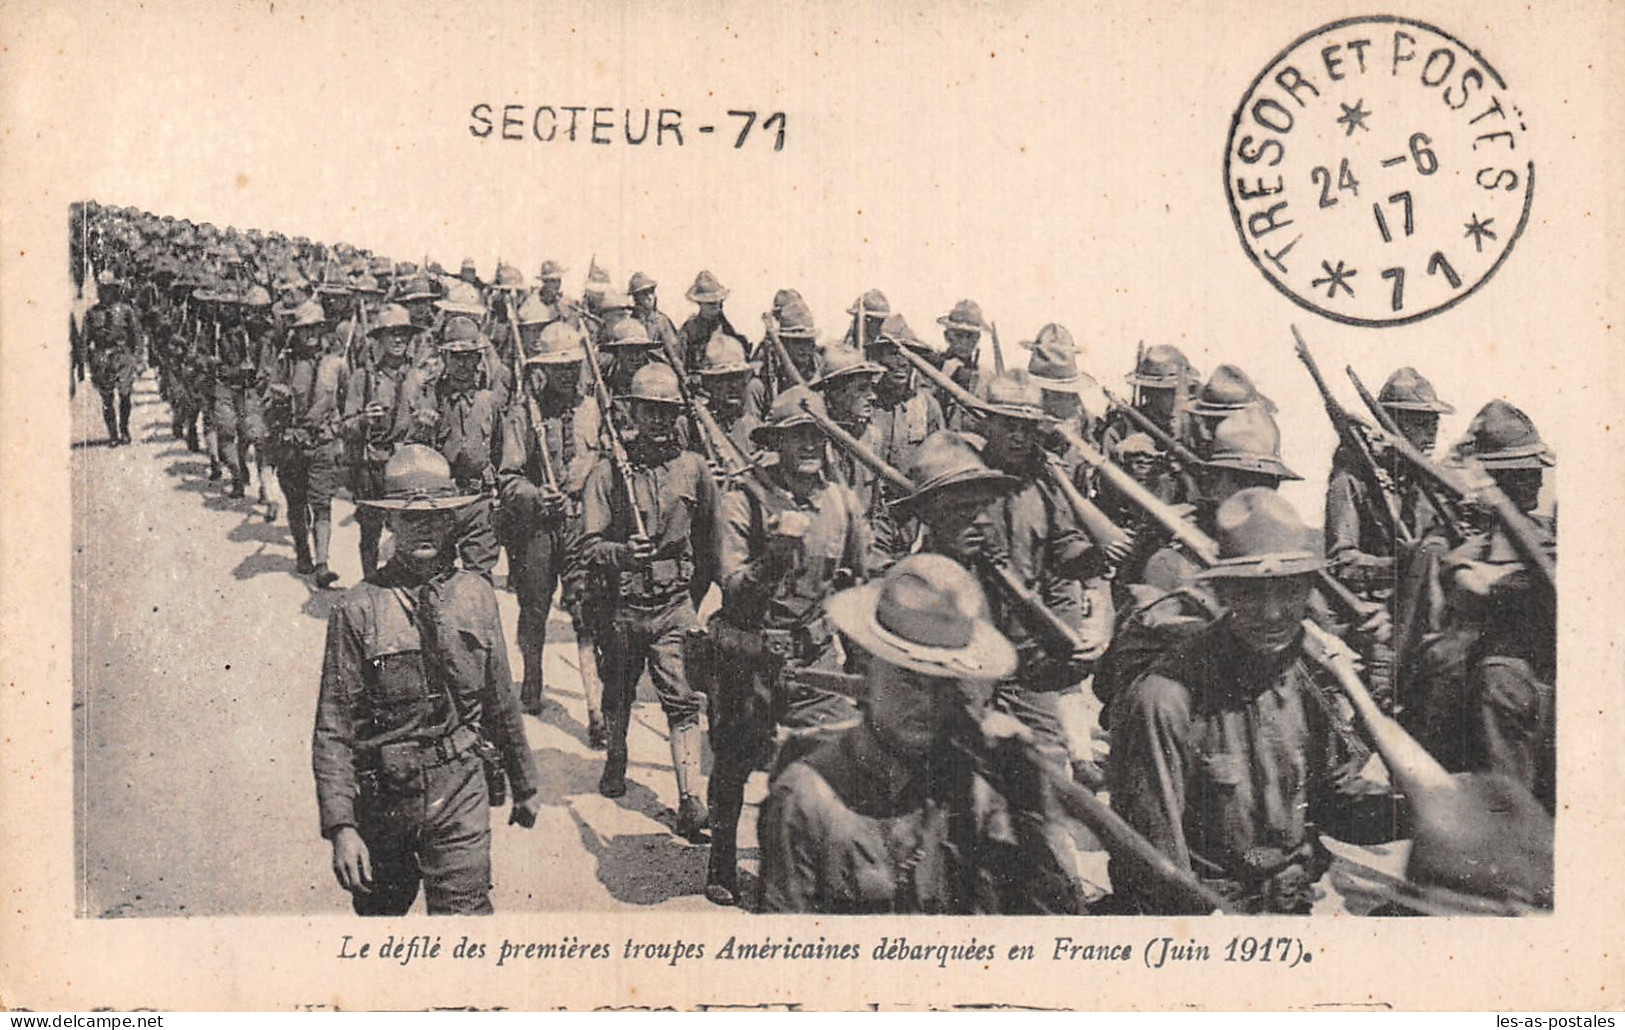  THEME MILITARIA TROUPE AMERICAINES DEBARQUEES EN France  - Characters